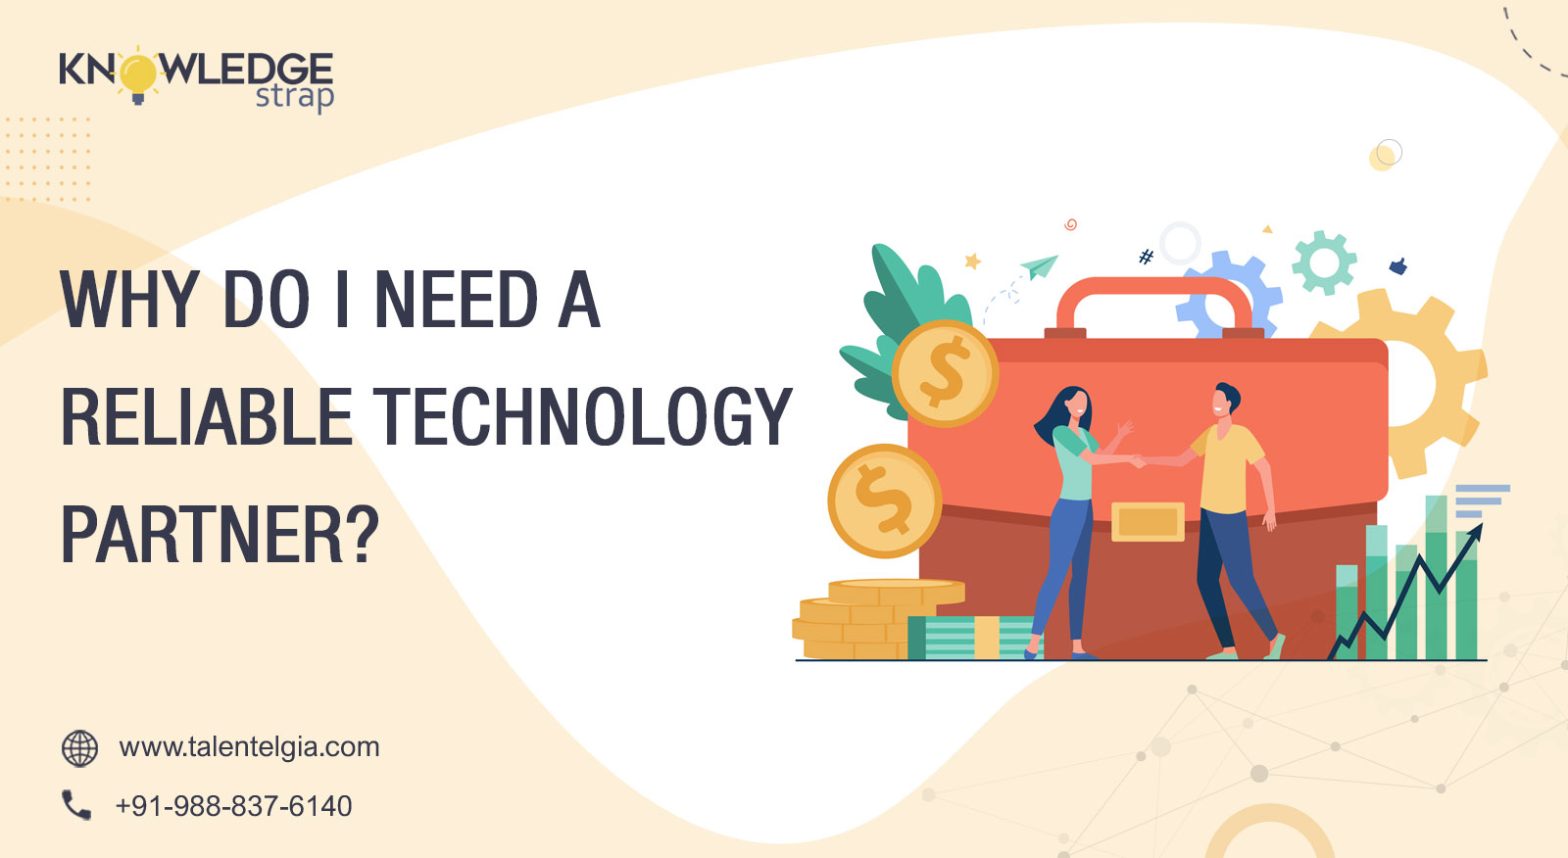 Why do I need a reliable technology partner